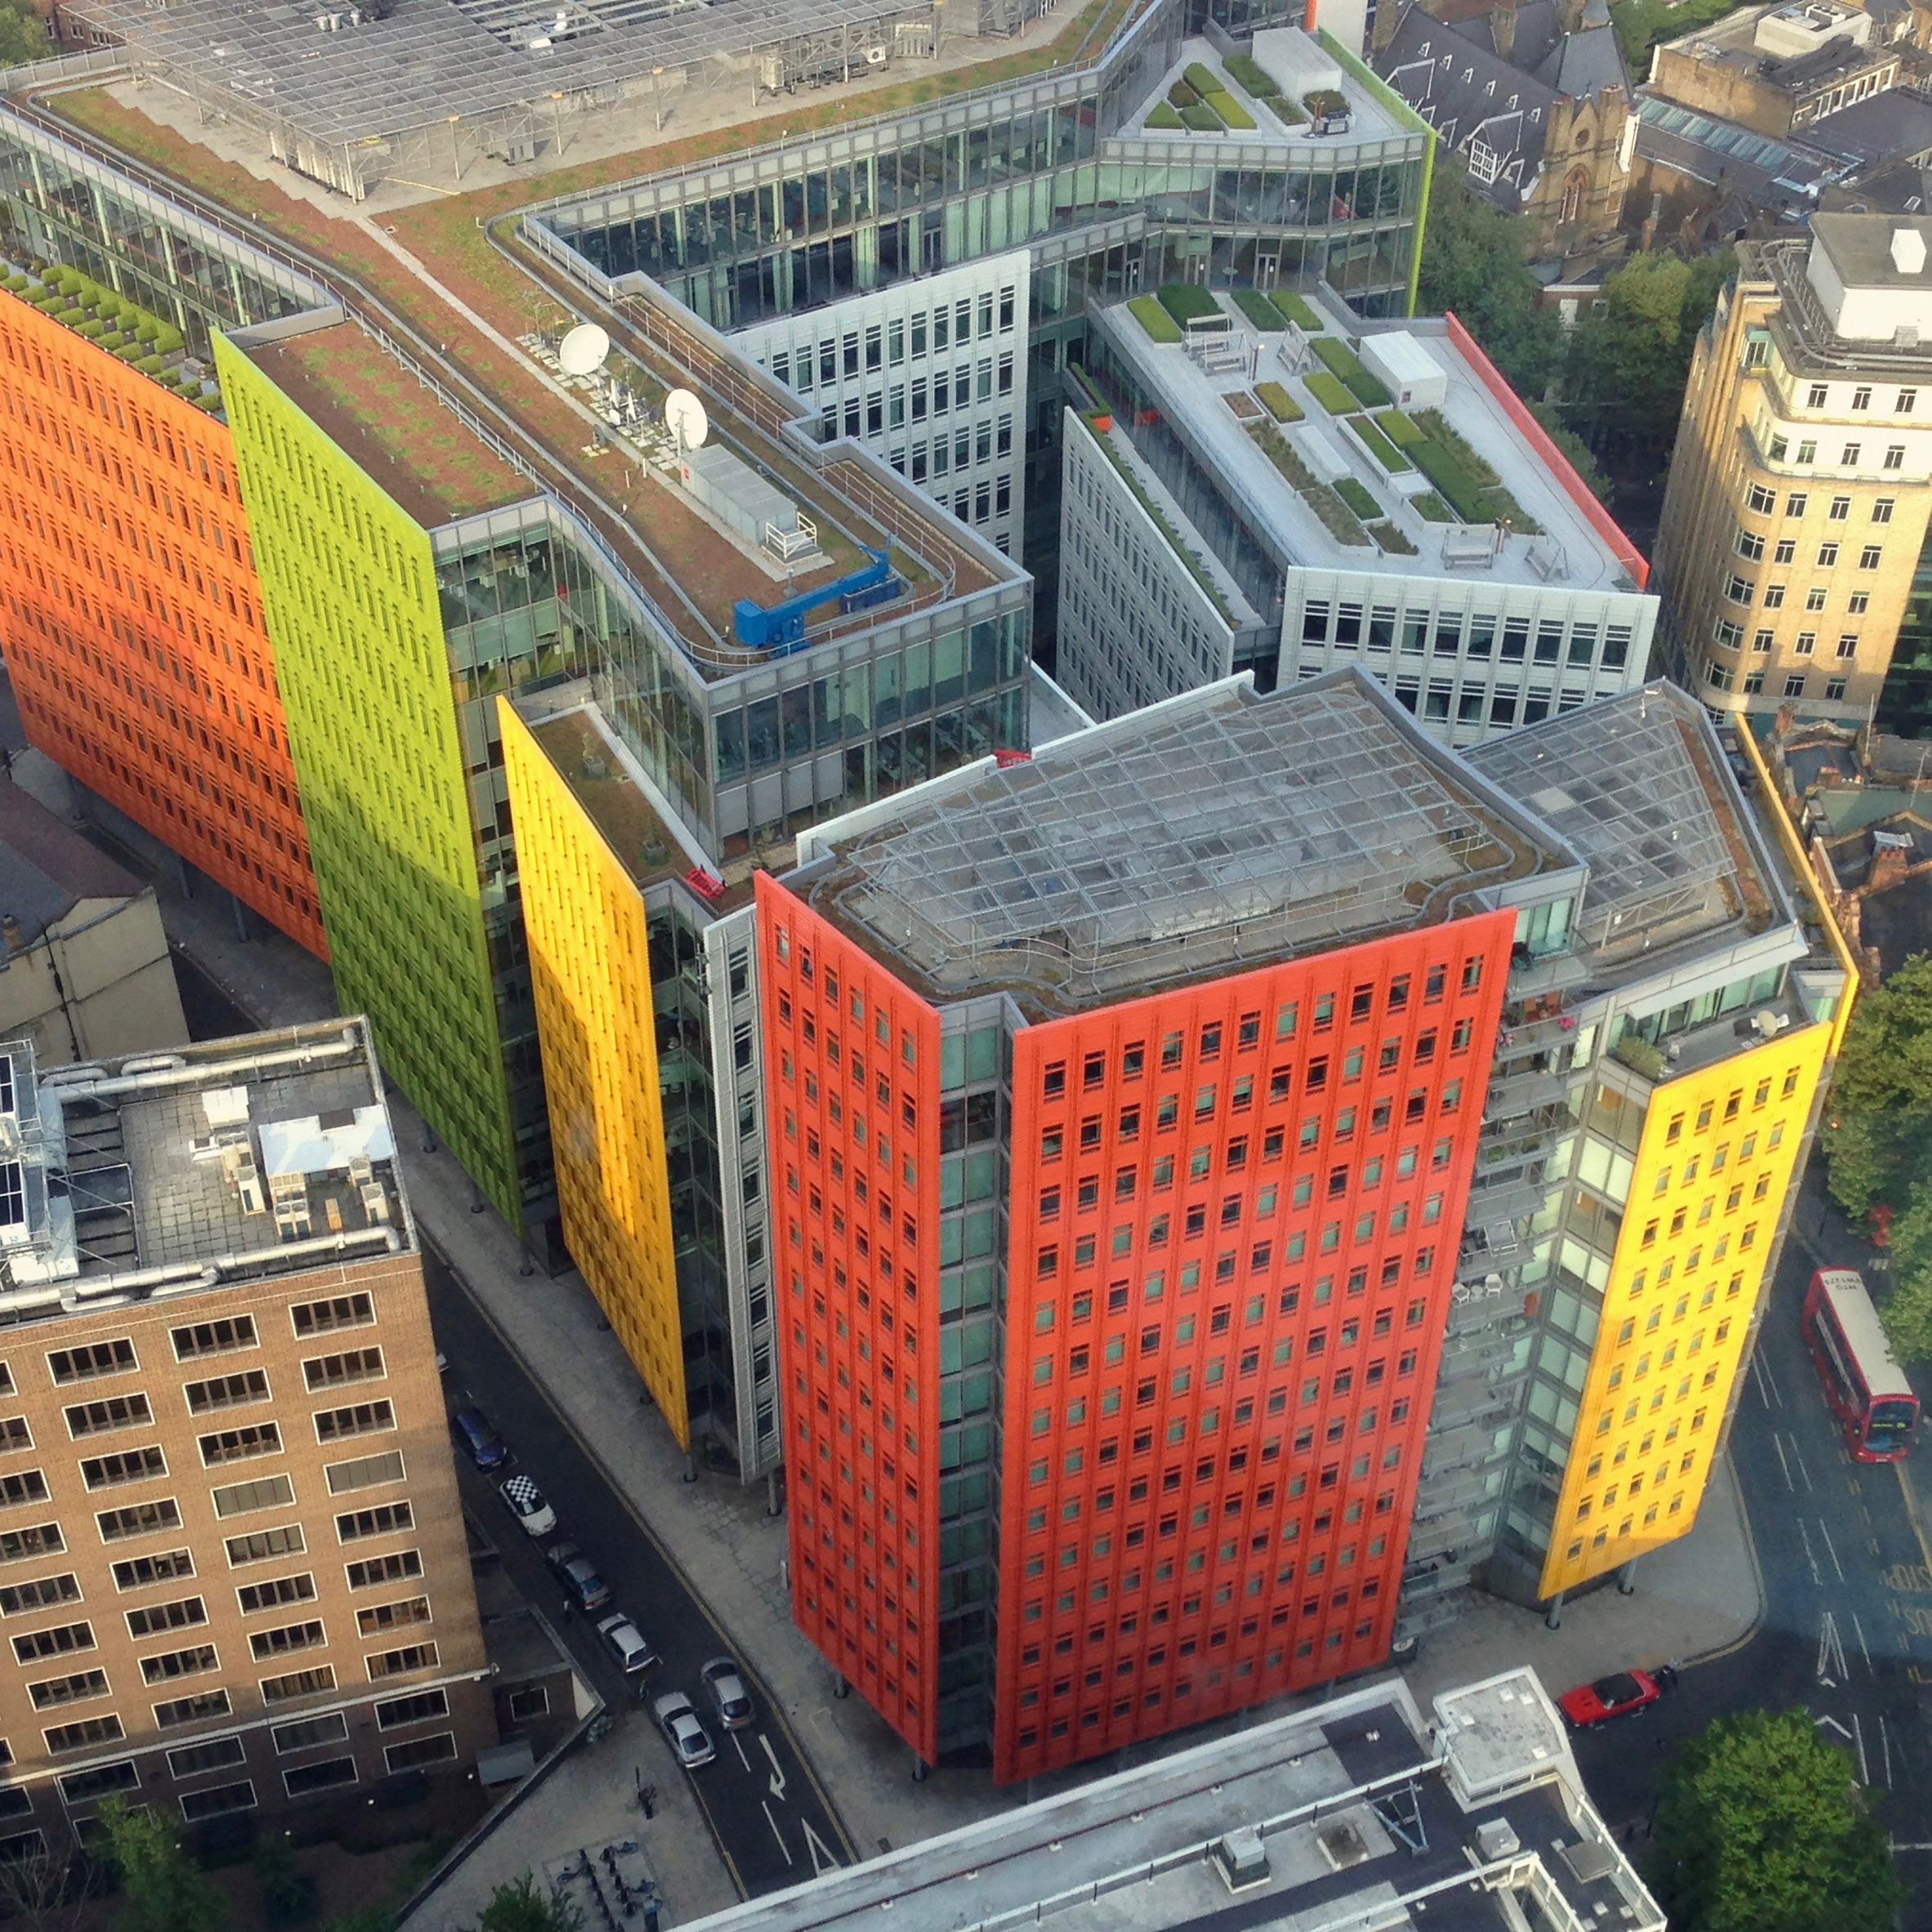 Google buys Renzo Piano's Central Saint Giles for London office